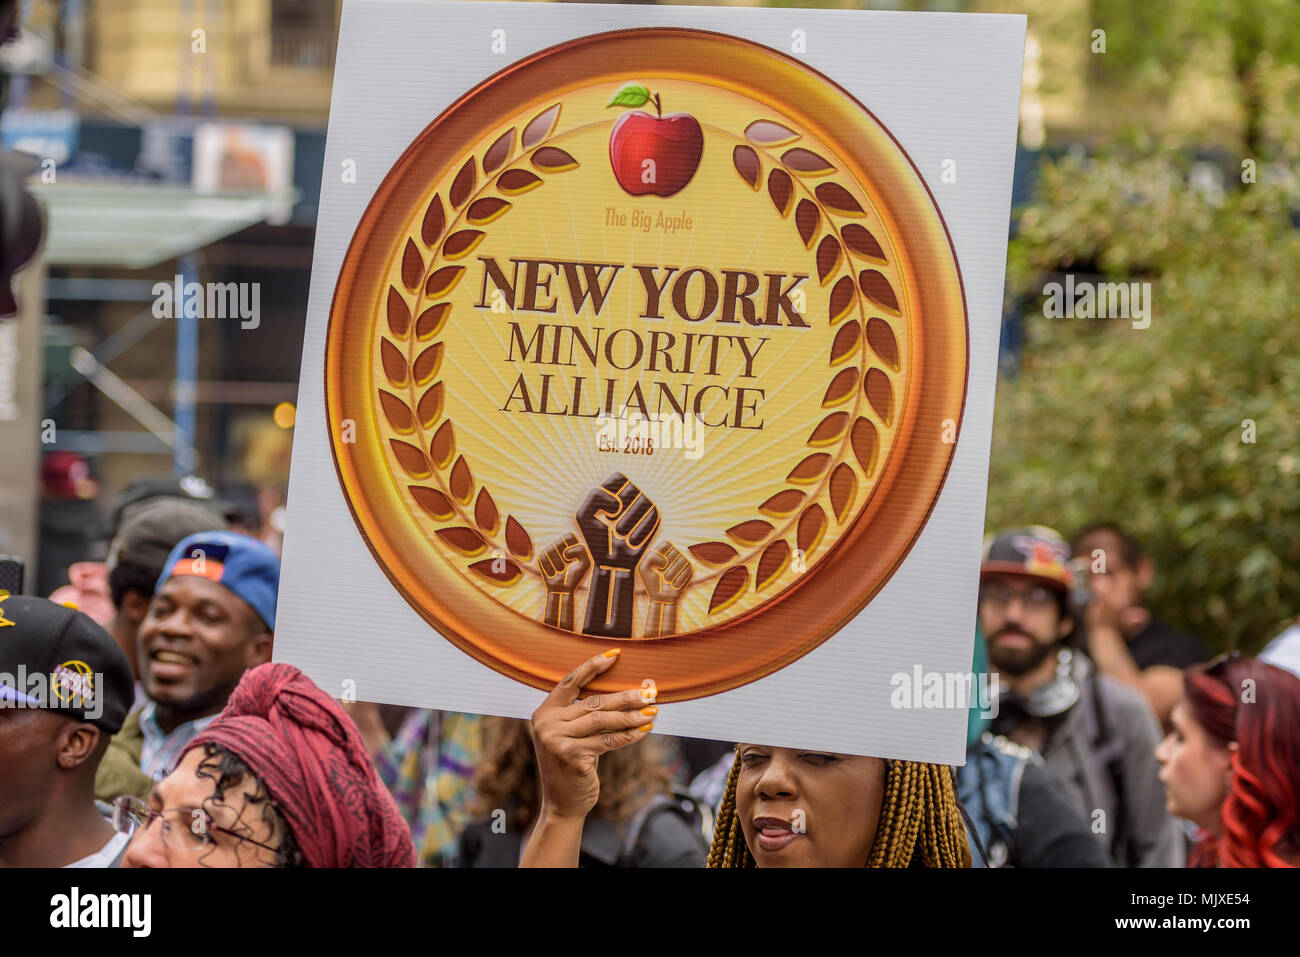 New York, United States. 05th May, 2018. The NYC Cannabis Parade and Rally, New York's longest running annual pro-cannabis demonstration, returned for its 47th year on May 5, 2018. The event started in Midtown Manhattan and marched to Union Square Park for an afternoon rally, with a powerful roster of elected officials, including two state legislators and three City Council Members, speaking from stages in Midtown and Union Square Park throughout the day. Credit: Erik McGregor/Pacific Press/Alamy Live News Stock Photo